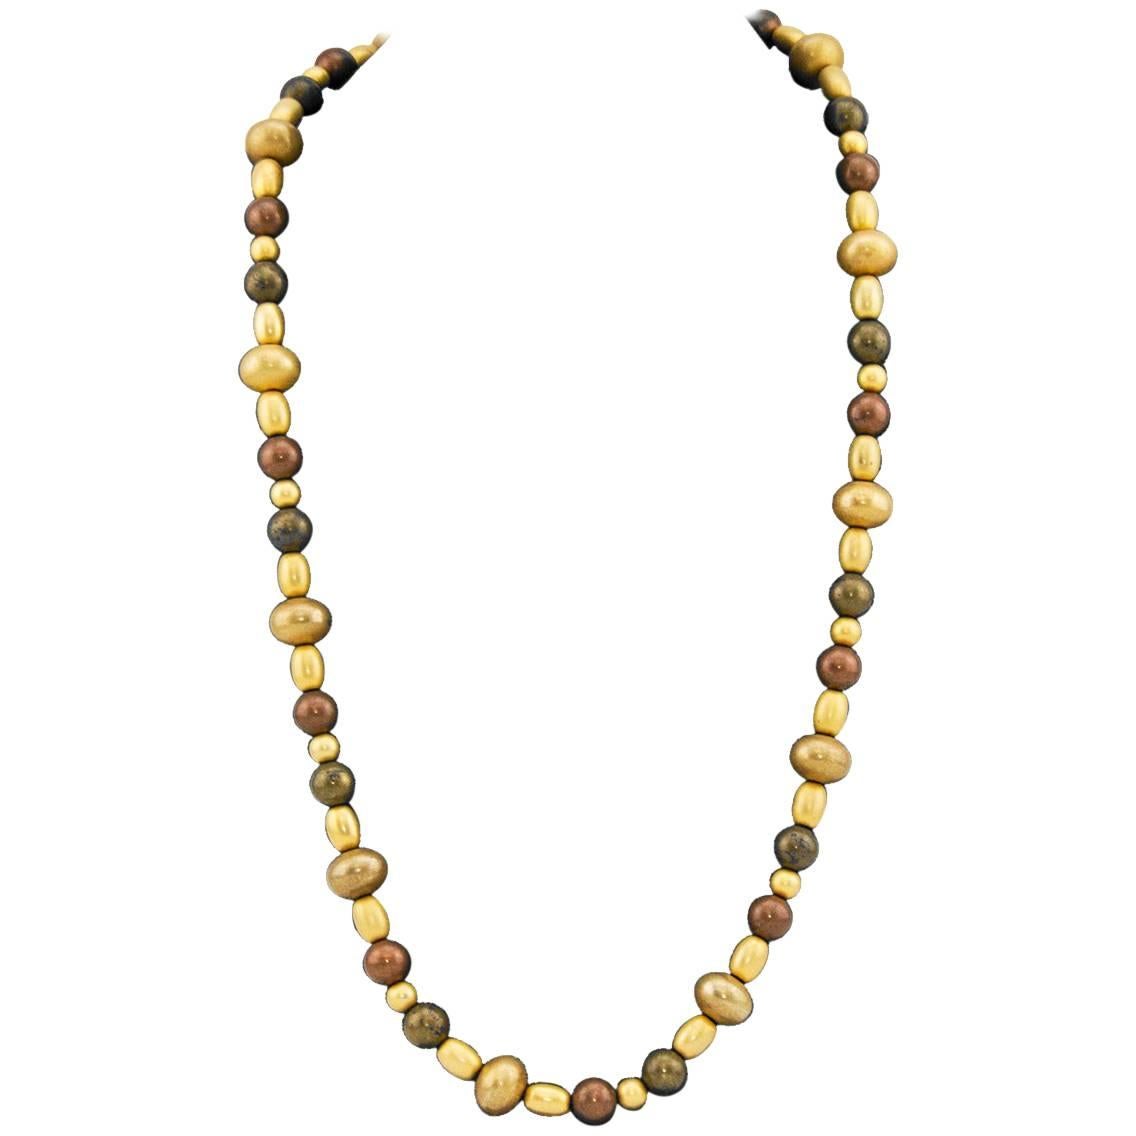 Givenchy Bronze and Gold Beaded Necklace, 1970s